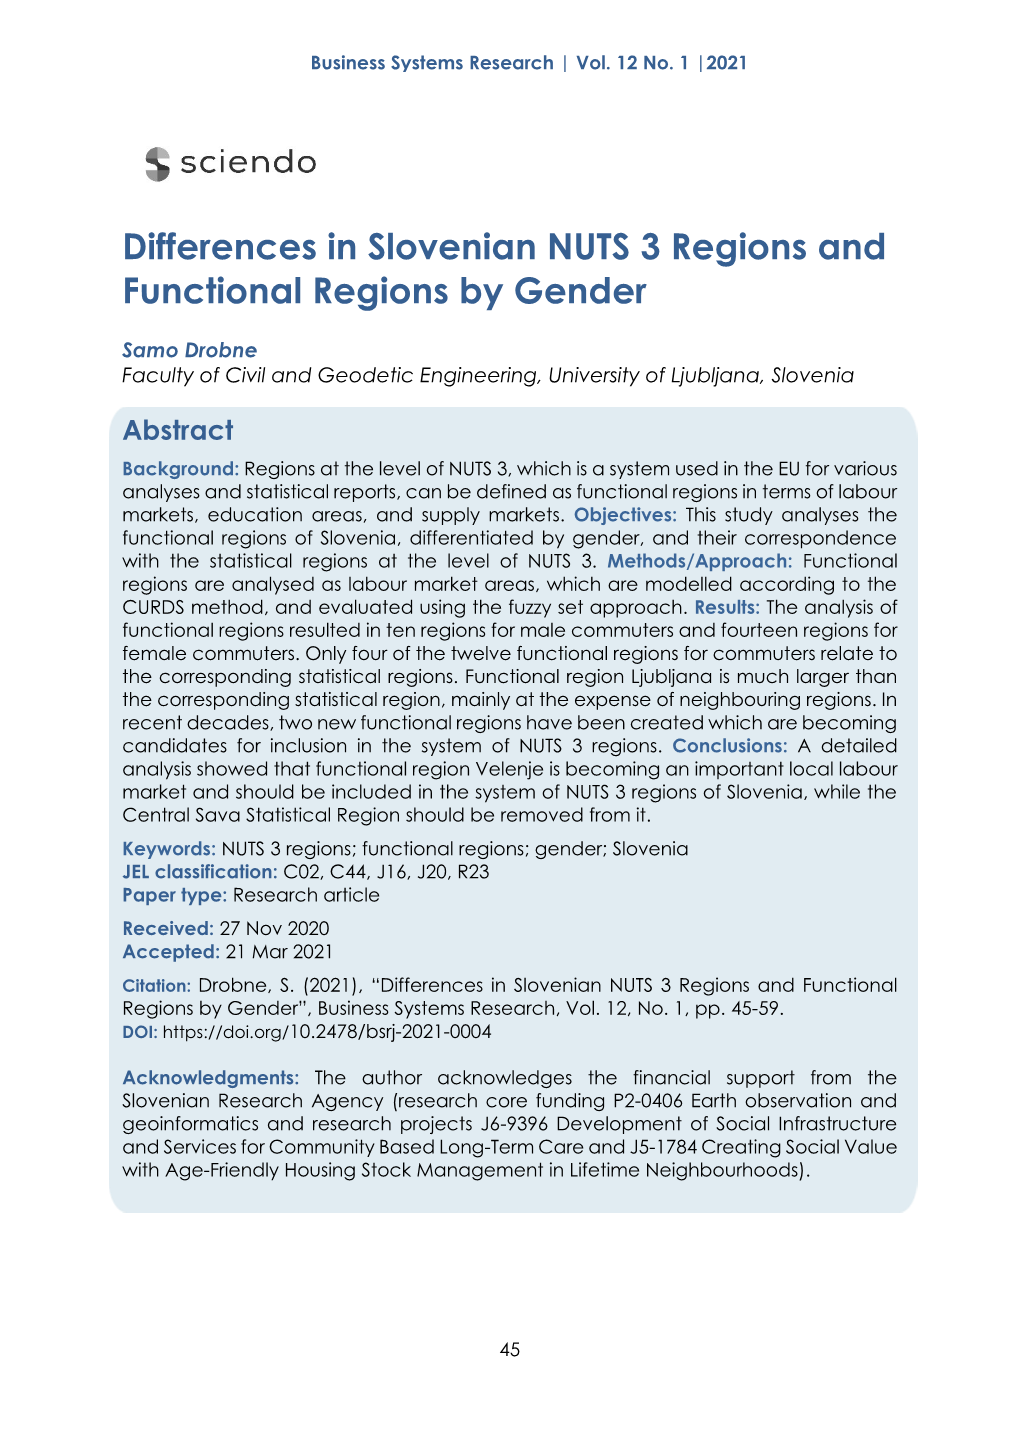 Differences in Slovenian NUTS 3 Regions and Functional Regions by Gender